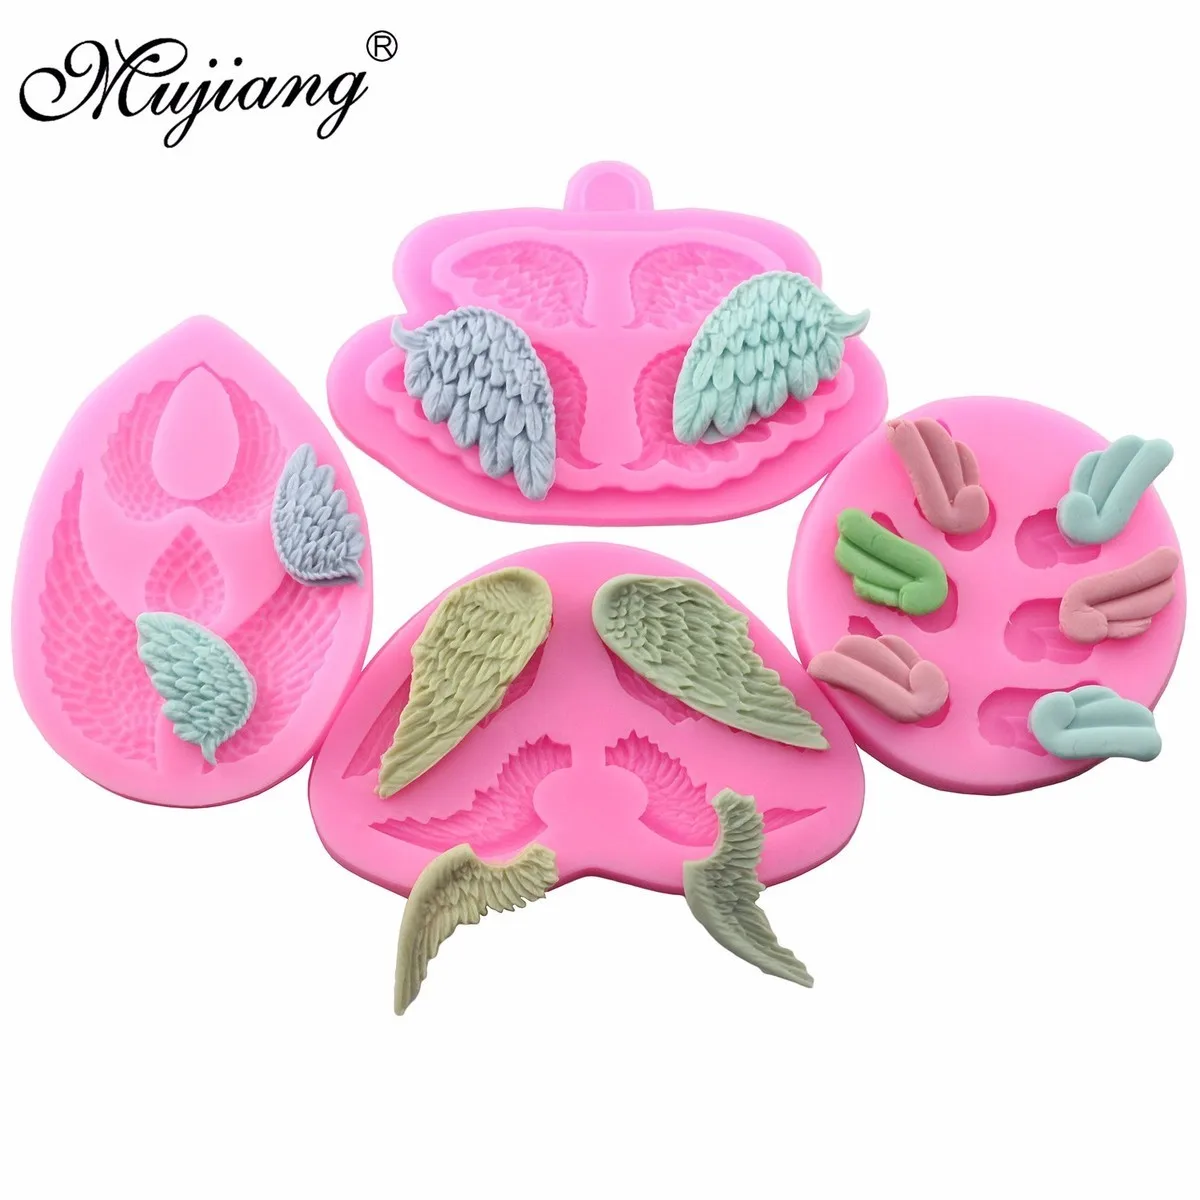 

Mujiang Angel Wings Silicone Mold Cupcake Fondant Cake Decorating Tools Gumpaste Chocolate Candy Clay Molds Kitchen Baking